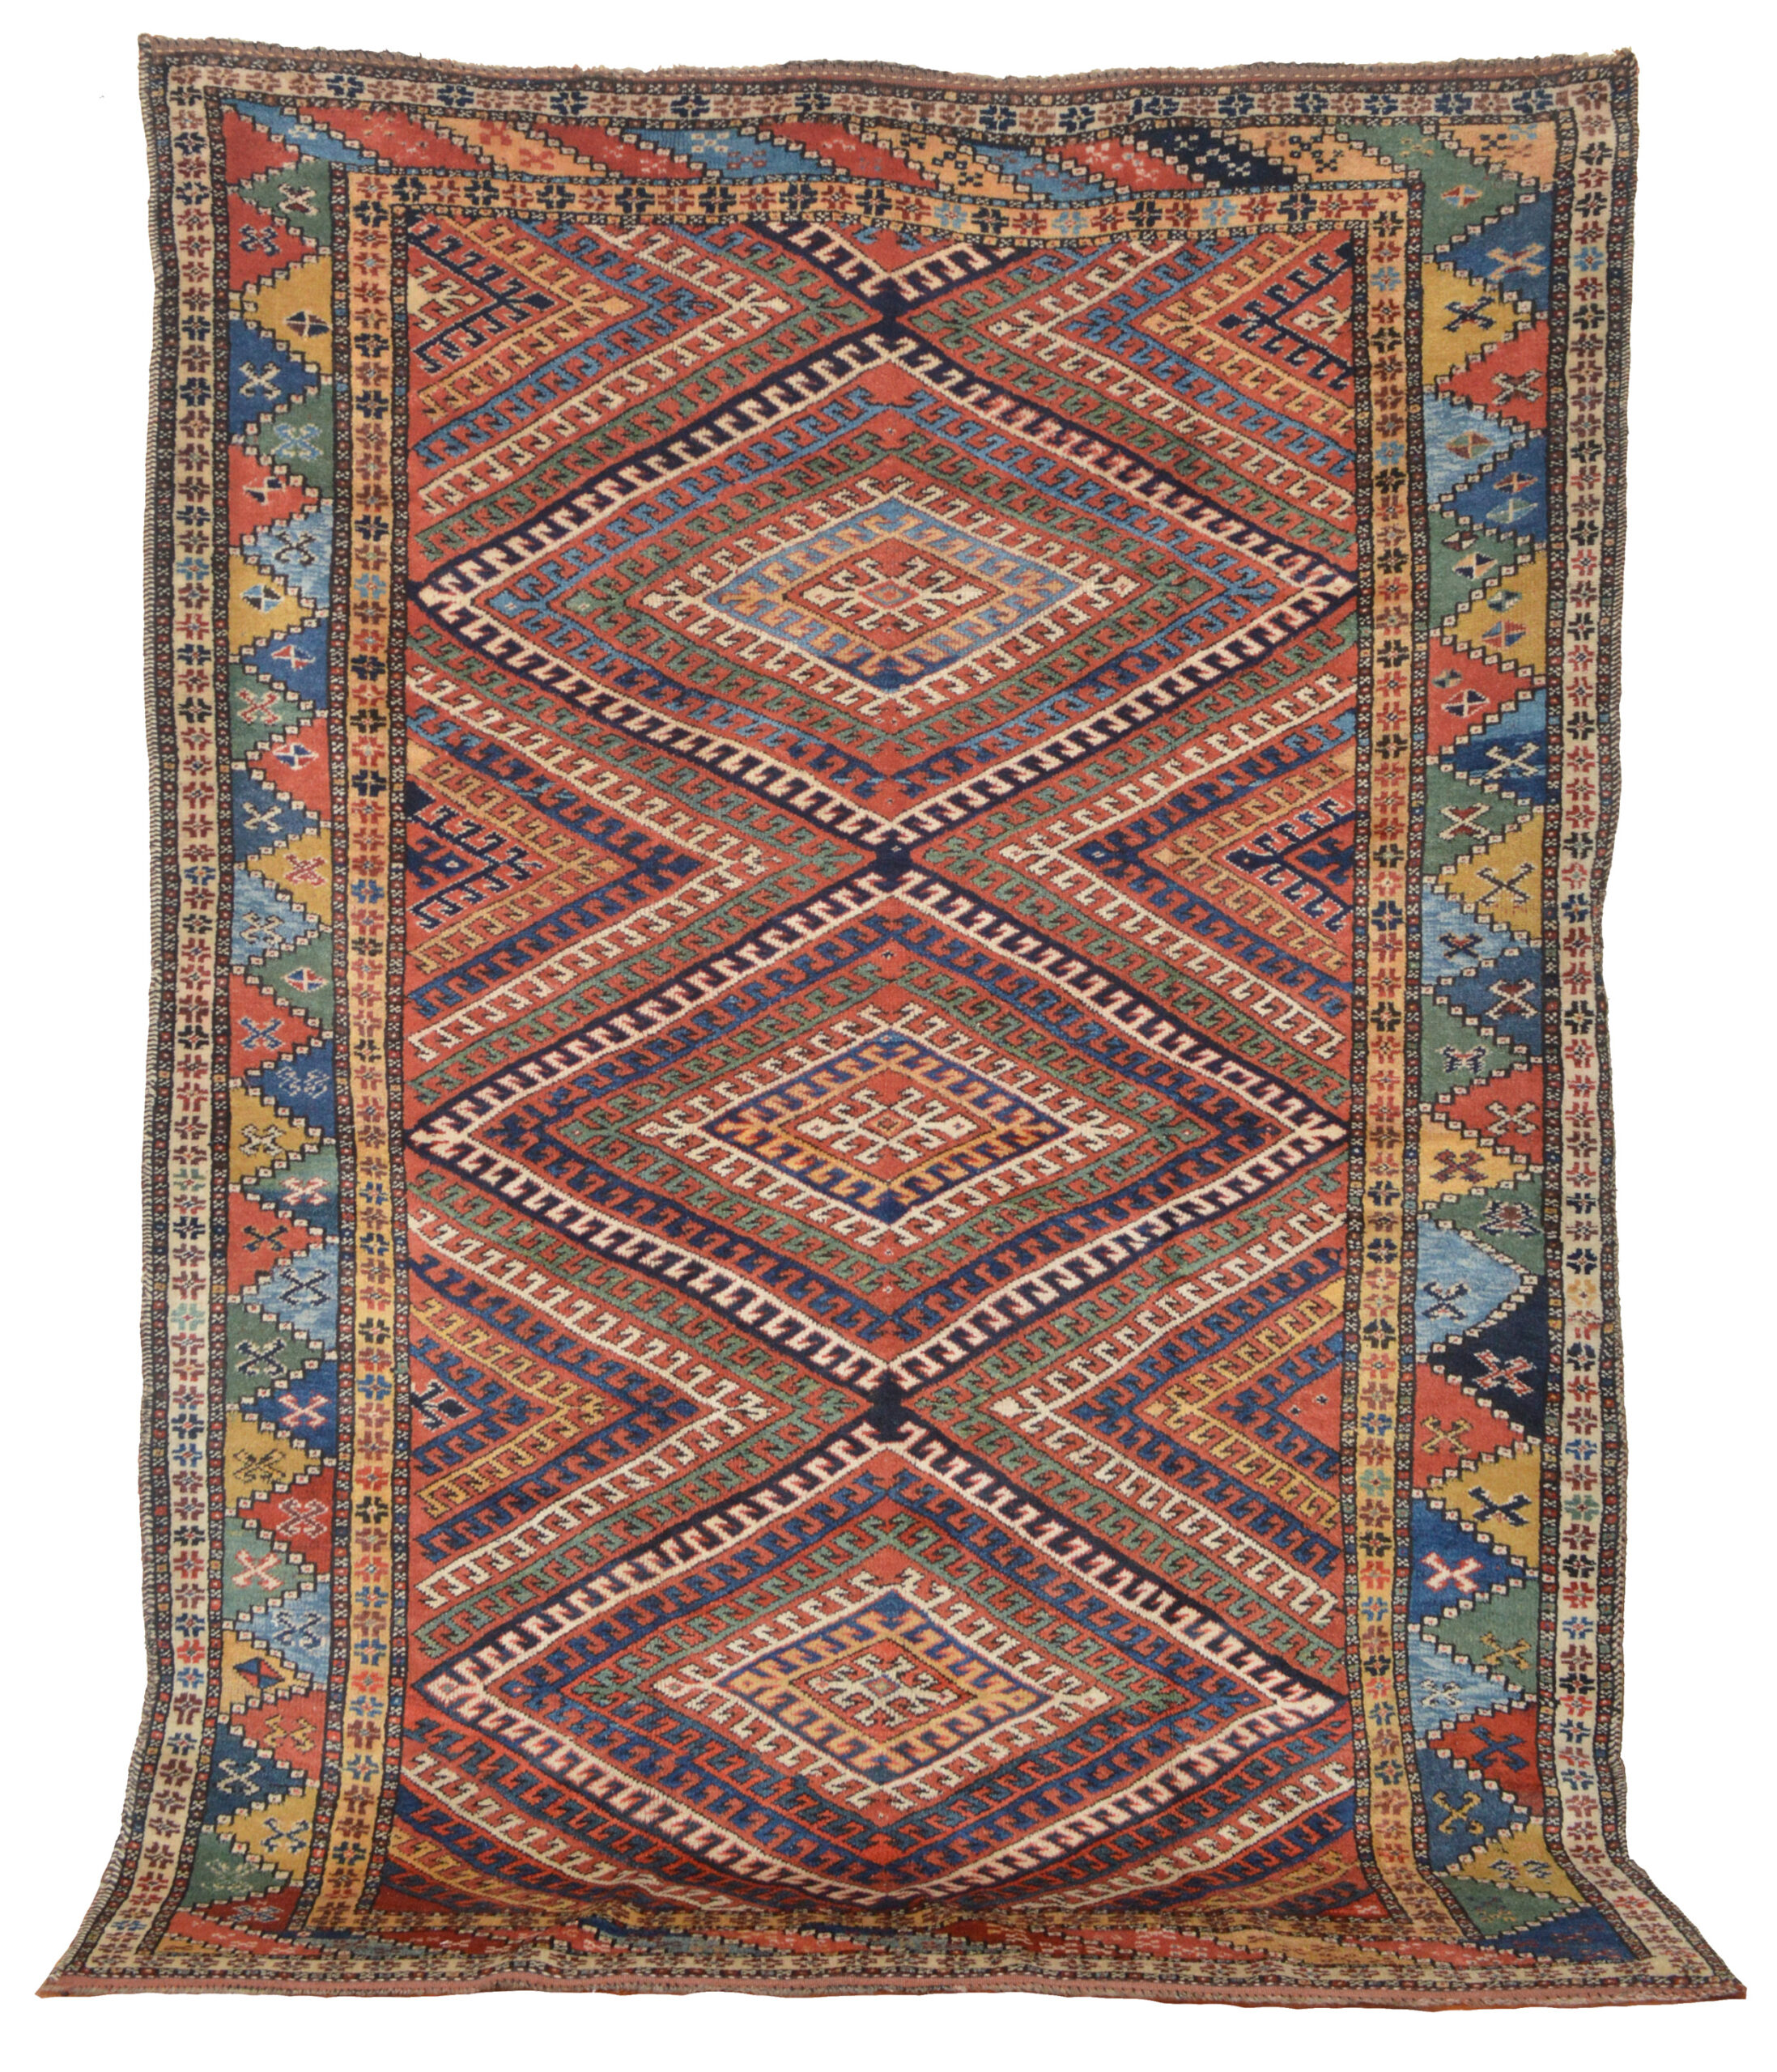 Douglas Stock Gallery, antique Oriental rugs Boston,MA area, antique tribal rugs. An antique south Persian Luri tribal rug of unusually large size and featuring a polychromatic "eye dazzler" design, circa 1880.